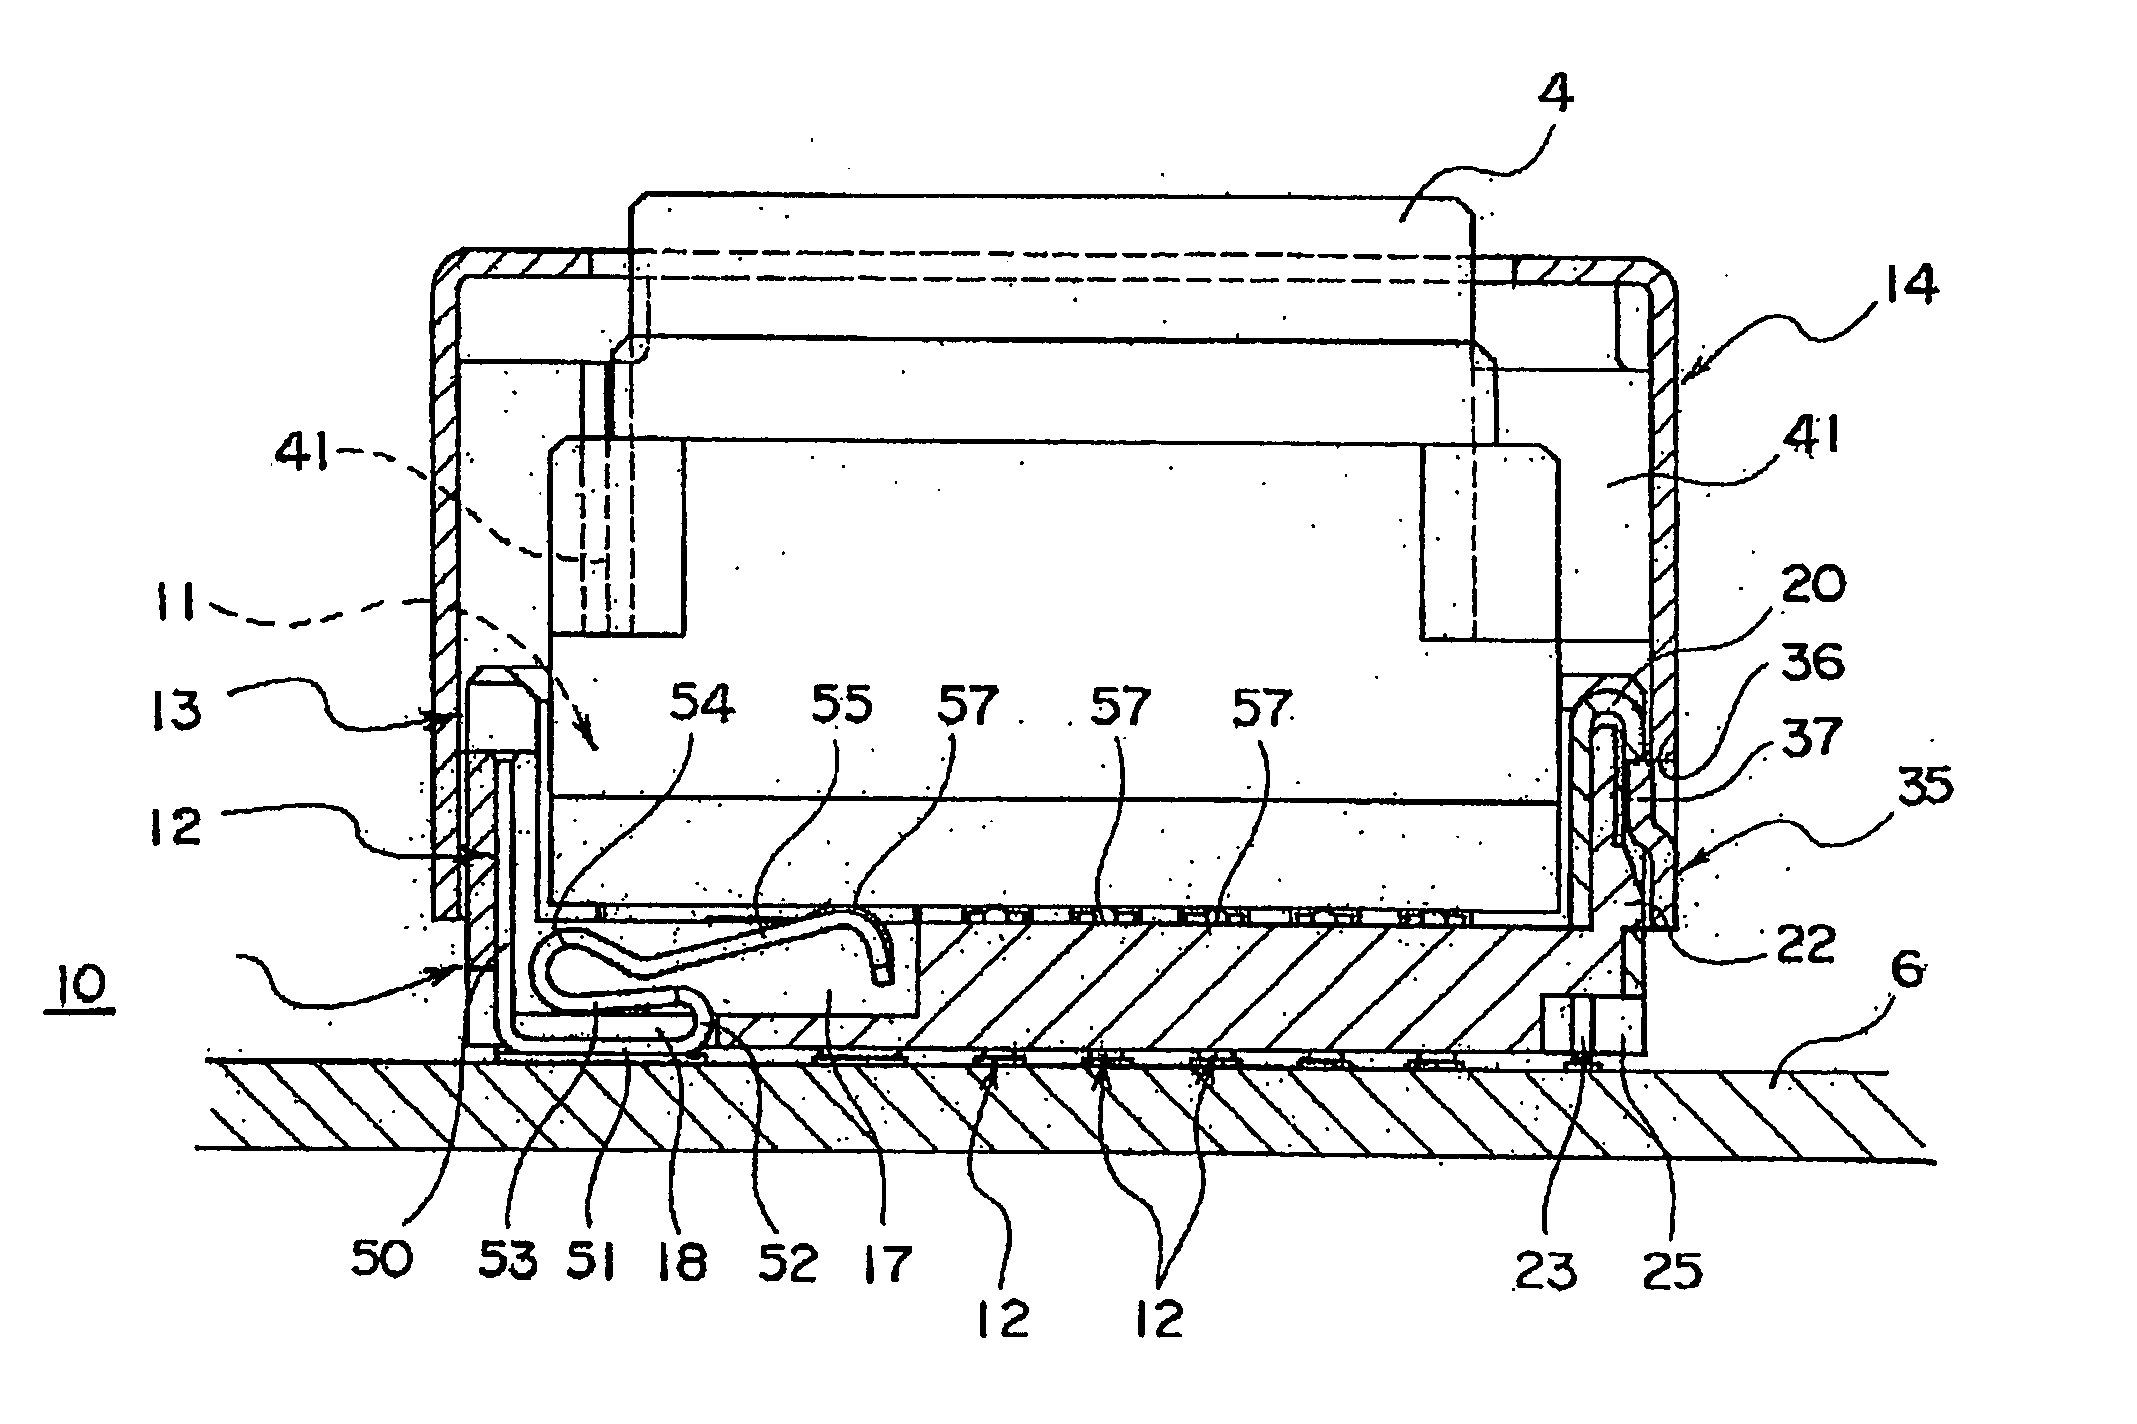 Socket for attaching an electronic component